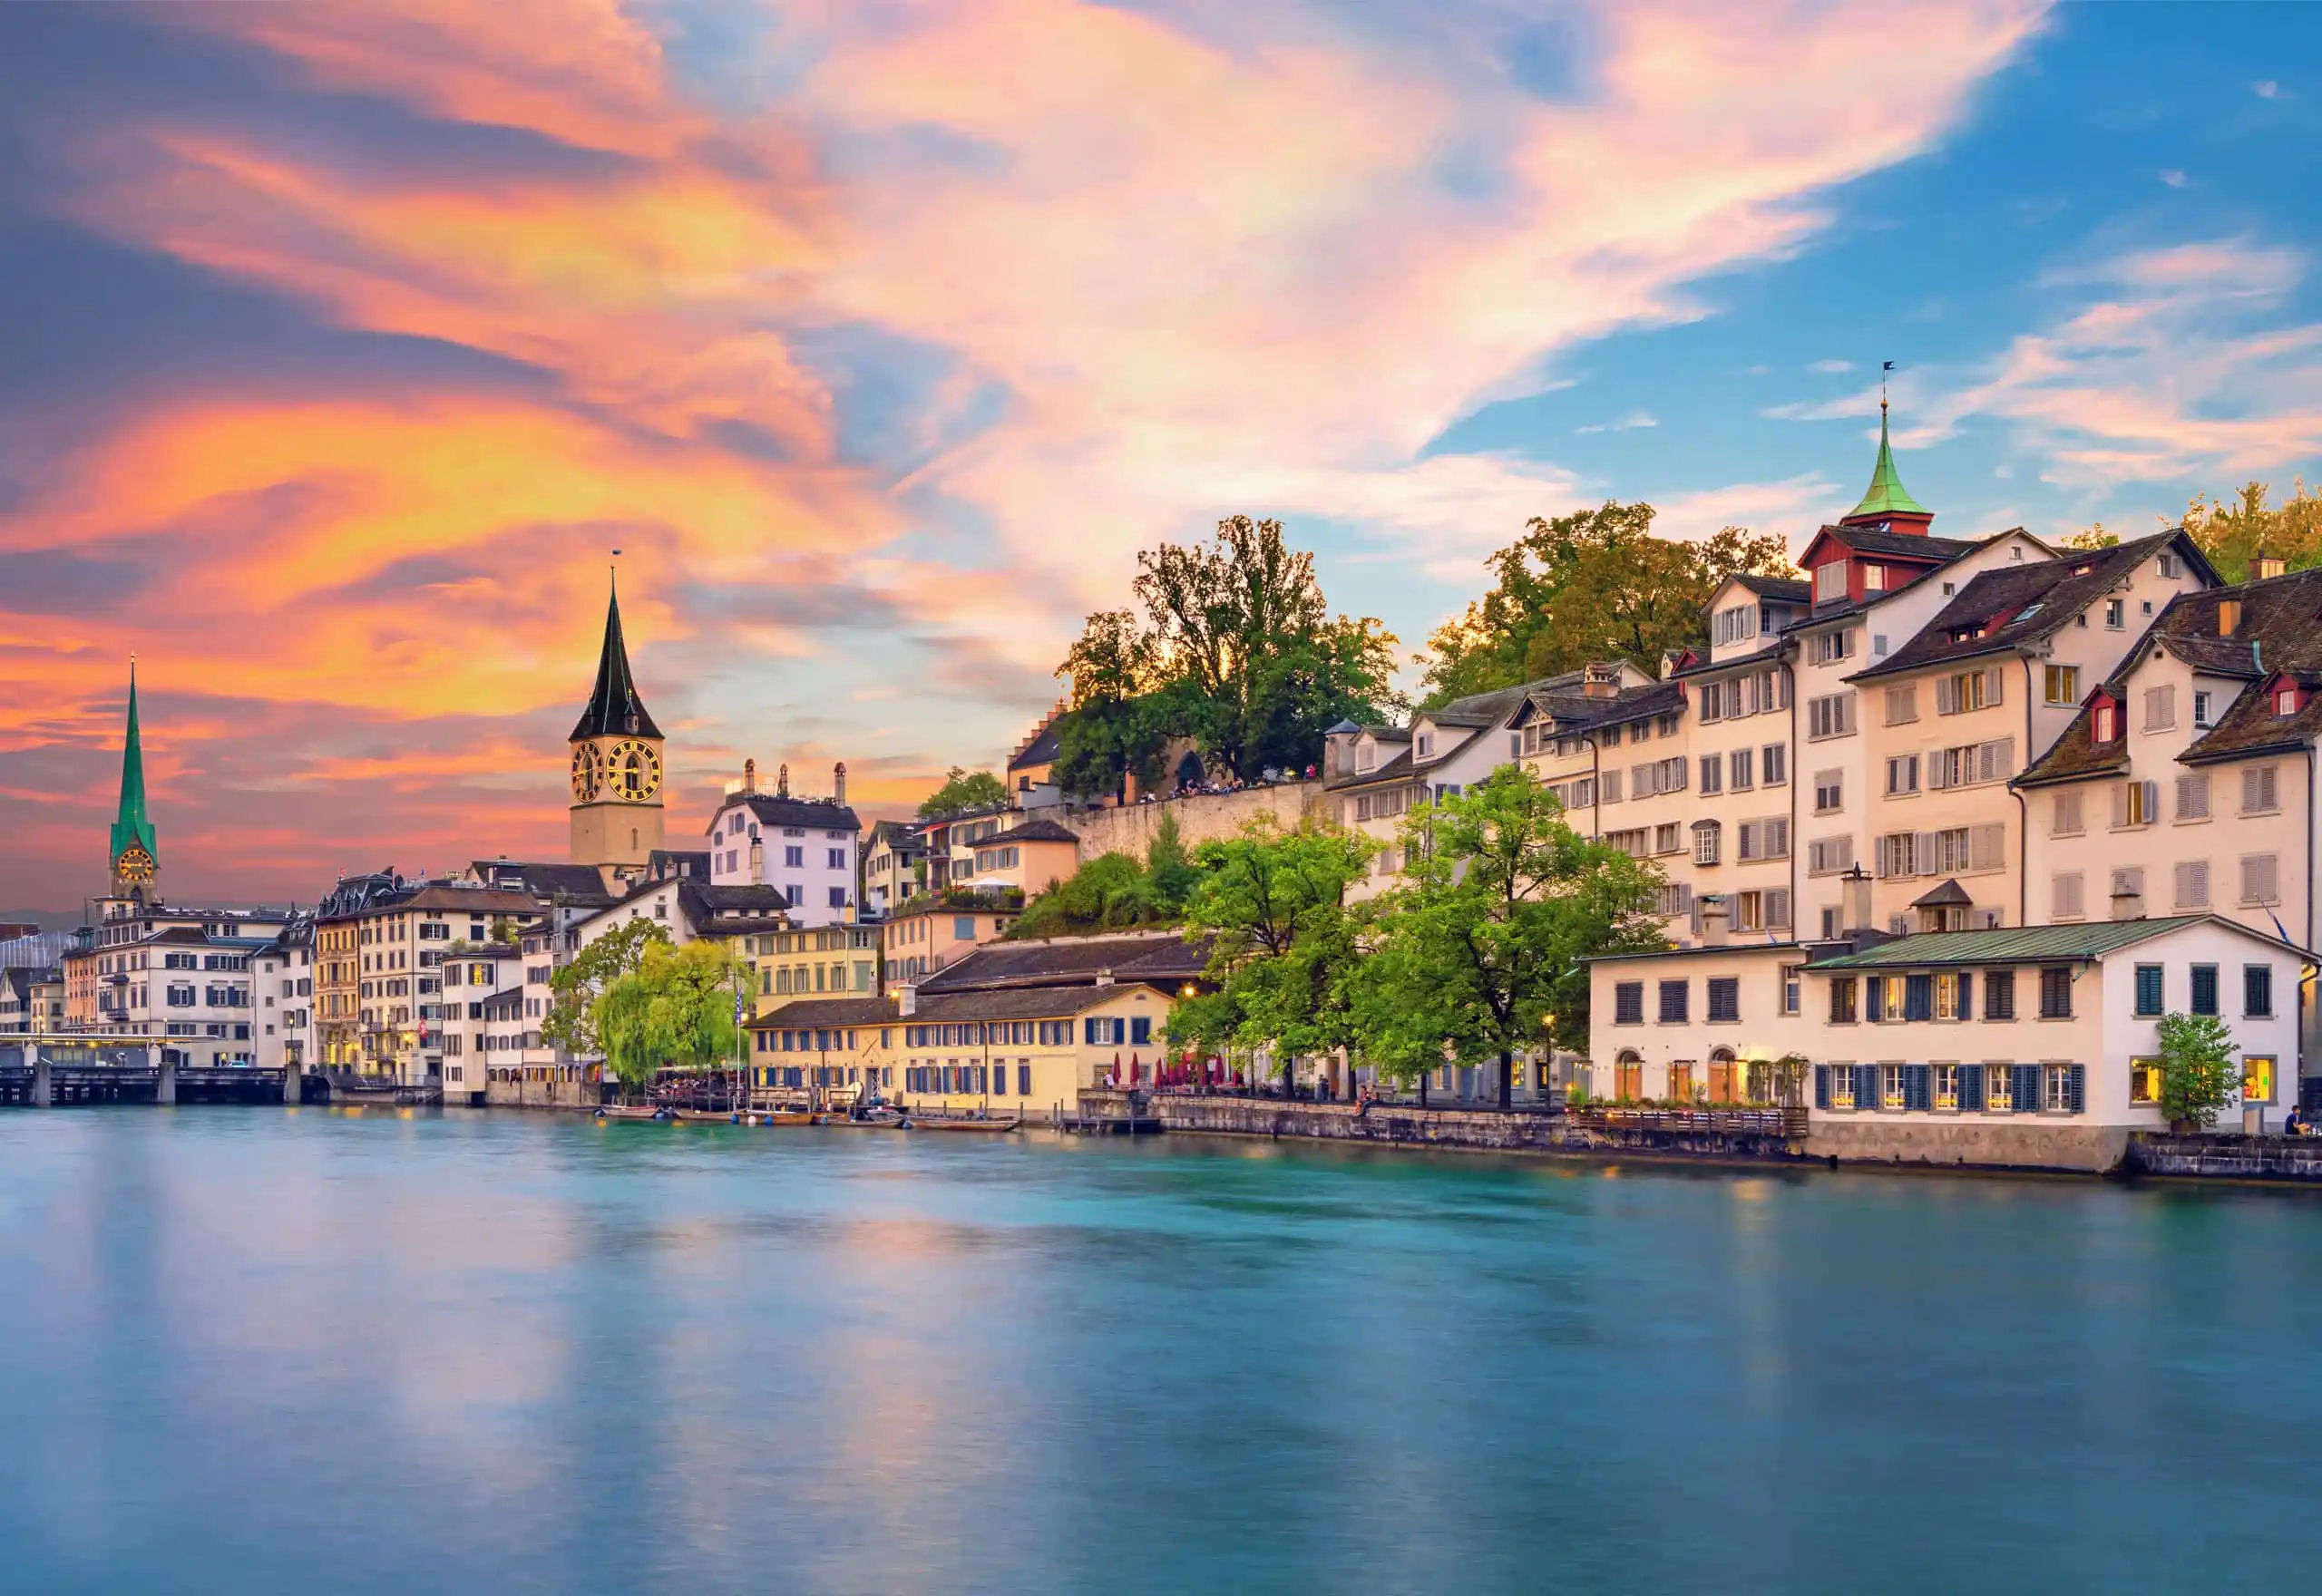 Electrical and Power Engineering Training Courses in Zurich